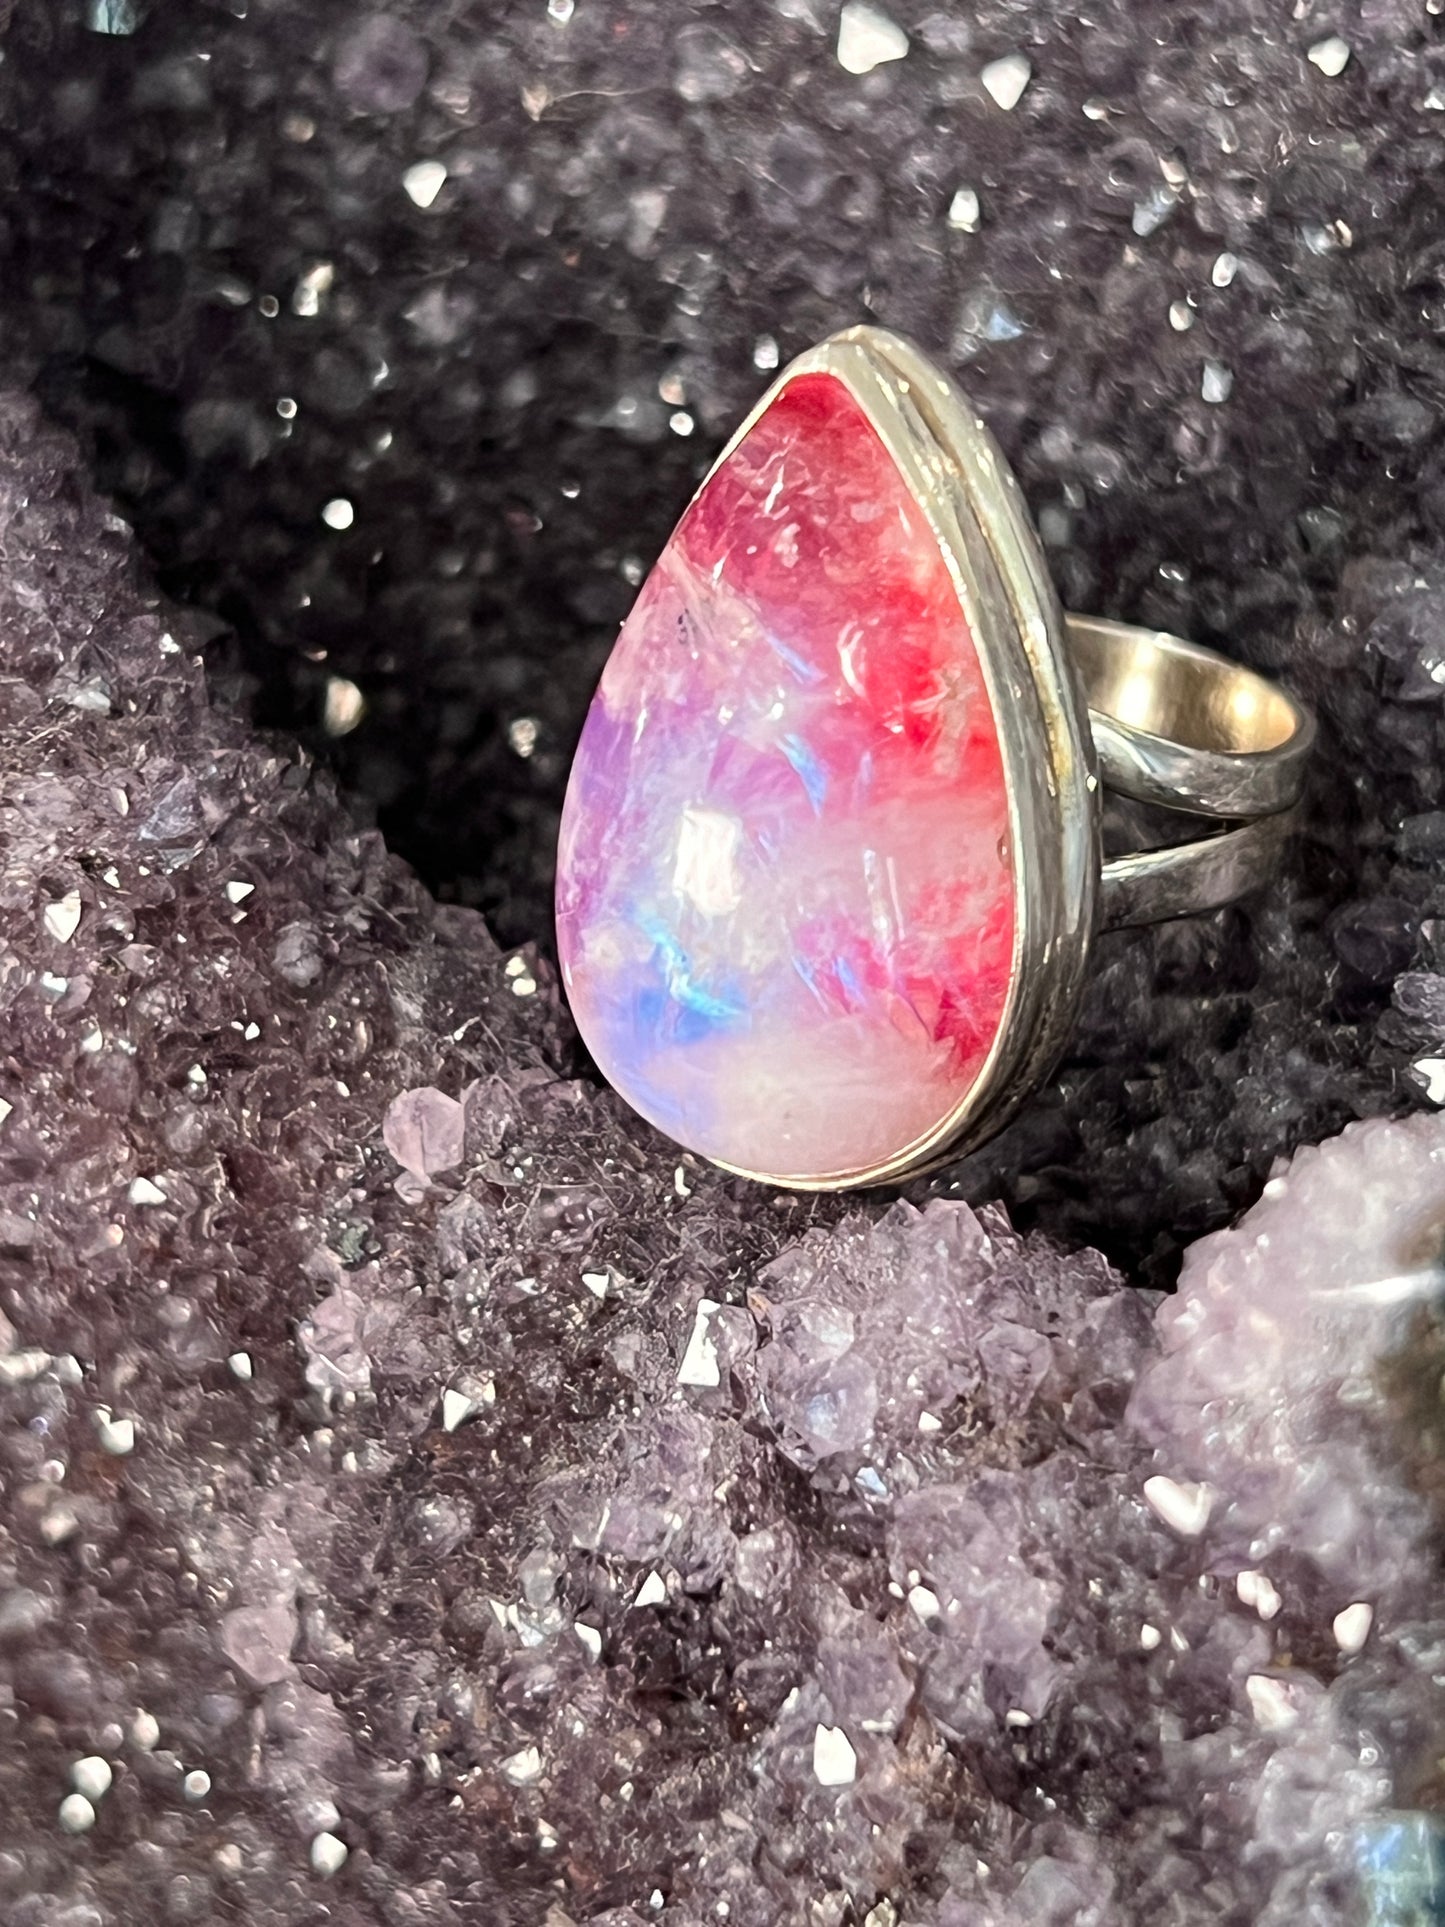 Pink Moonstone 925 Sterling Silver Ring /Boho Style pear cut stone